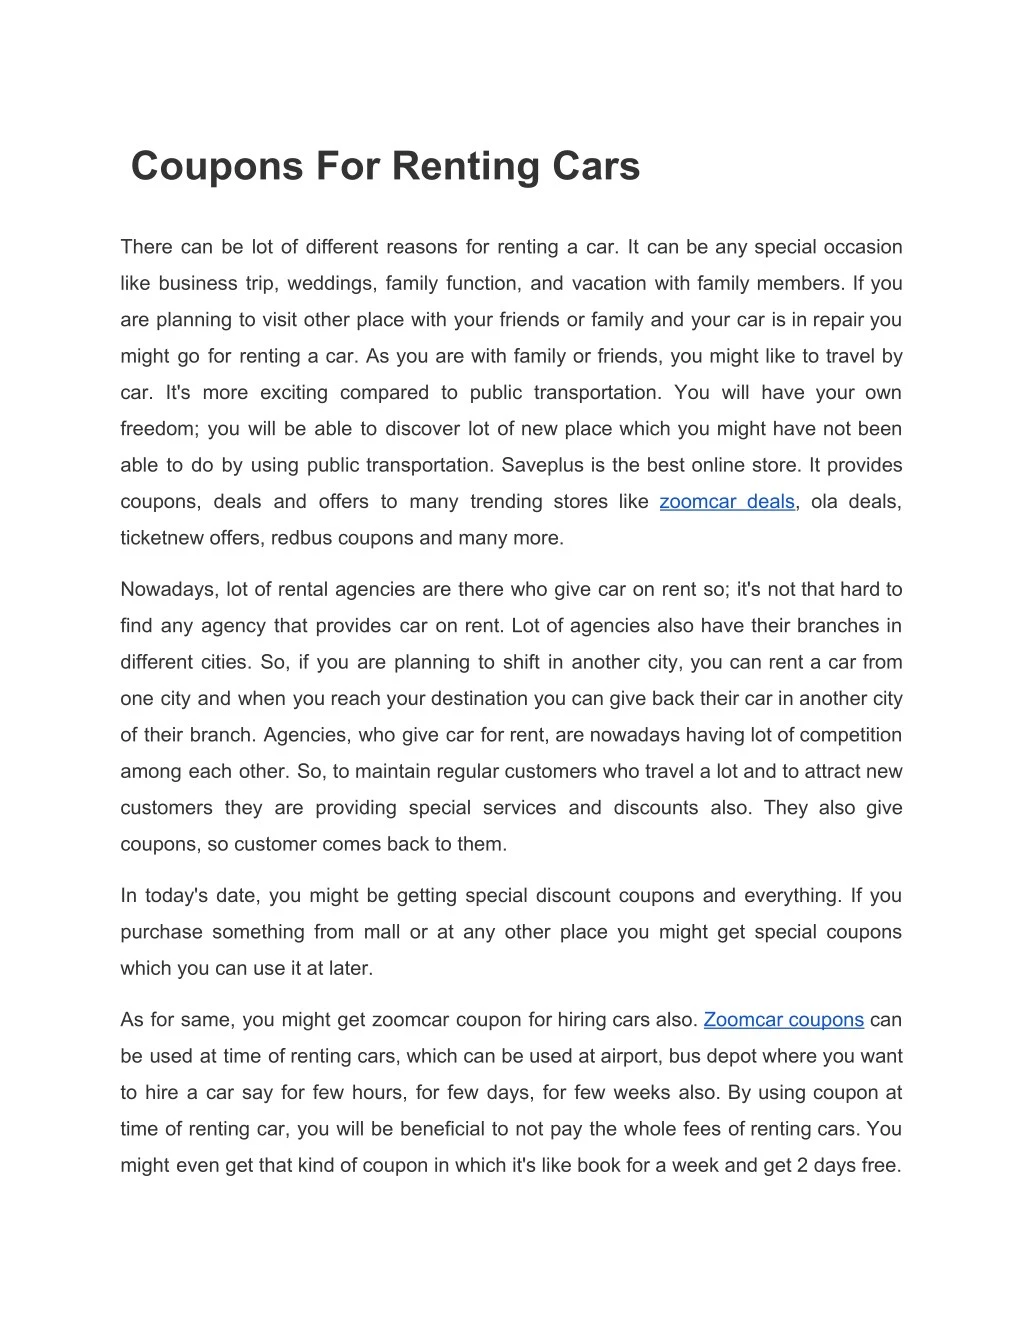 coupons for renting cars